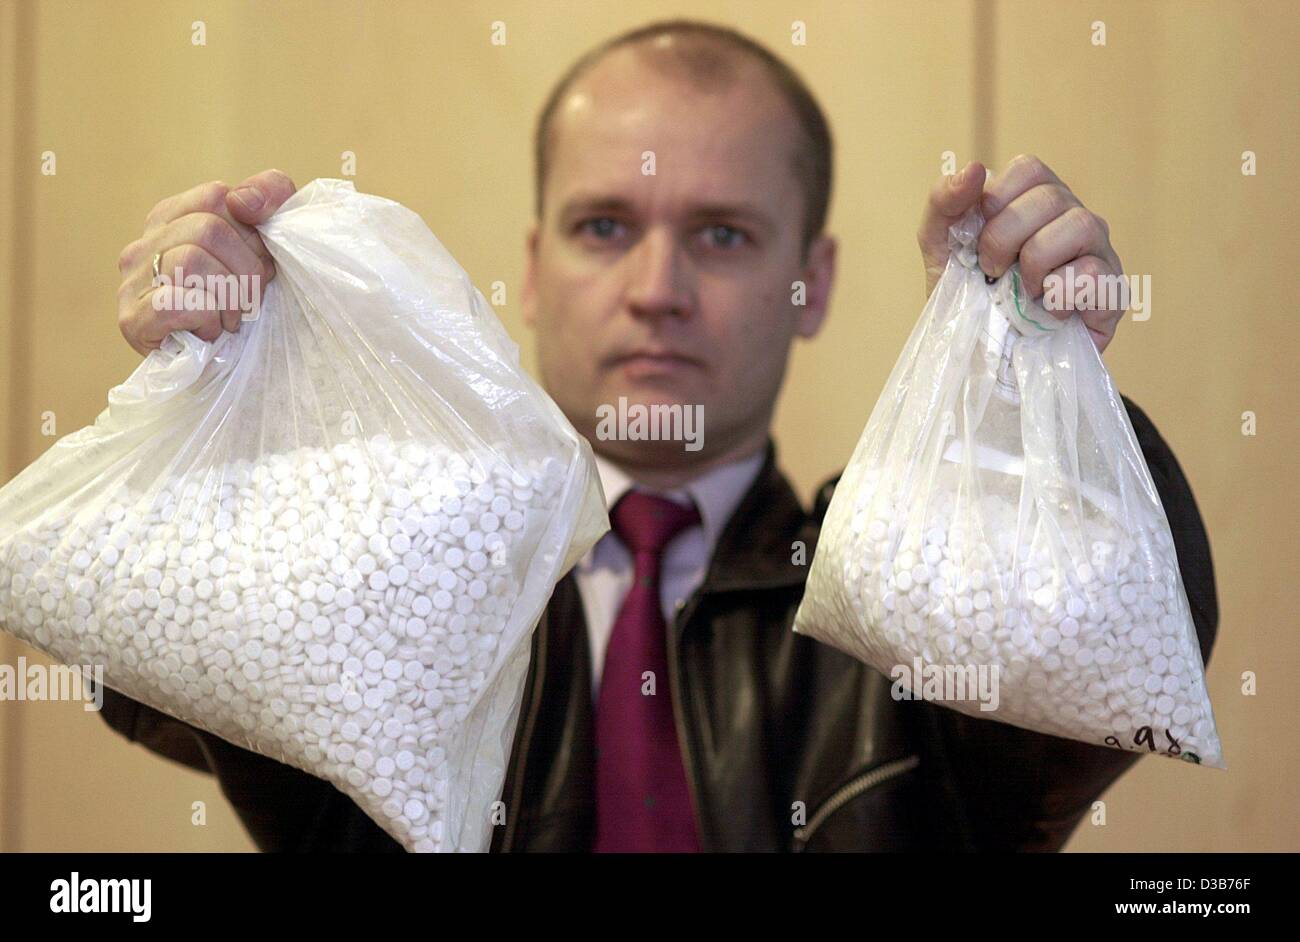 (dpa) - A police spokesman shows two bags of ecstasy pills in the police department in Frankfurt, 23 December 2002. The drugs were confiscated from a group of Dominican dealers in Frankfurt. Stock Photo